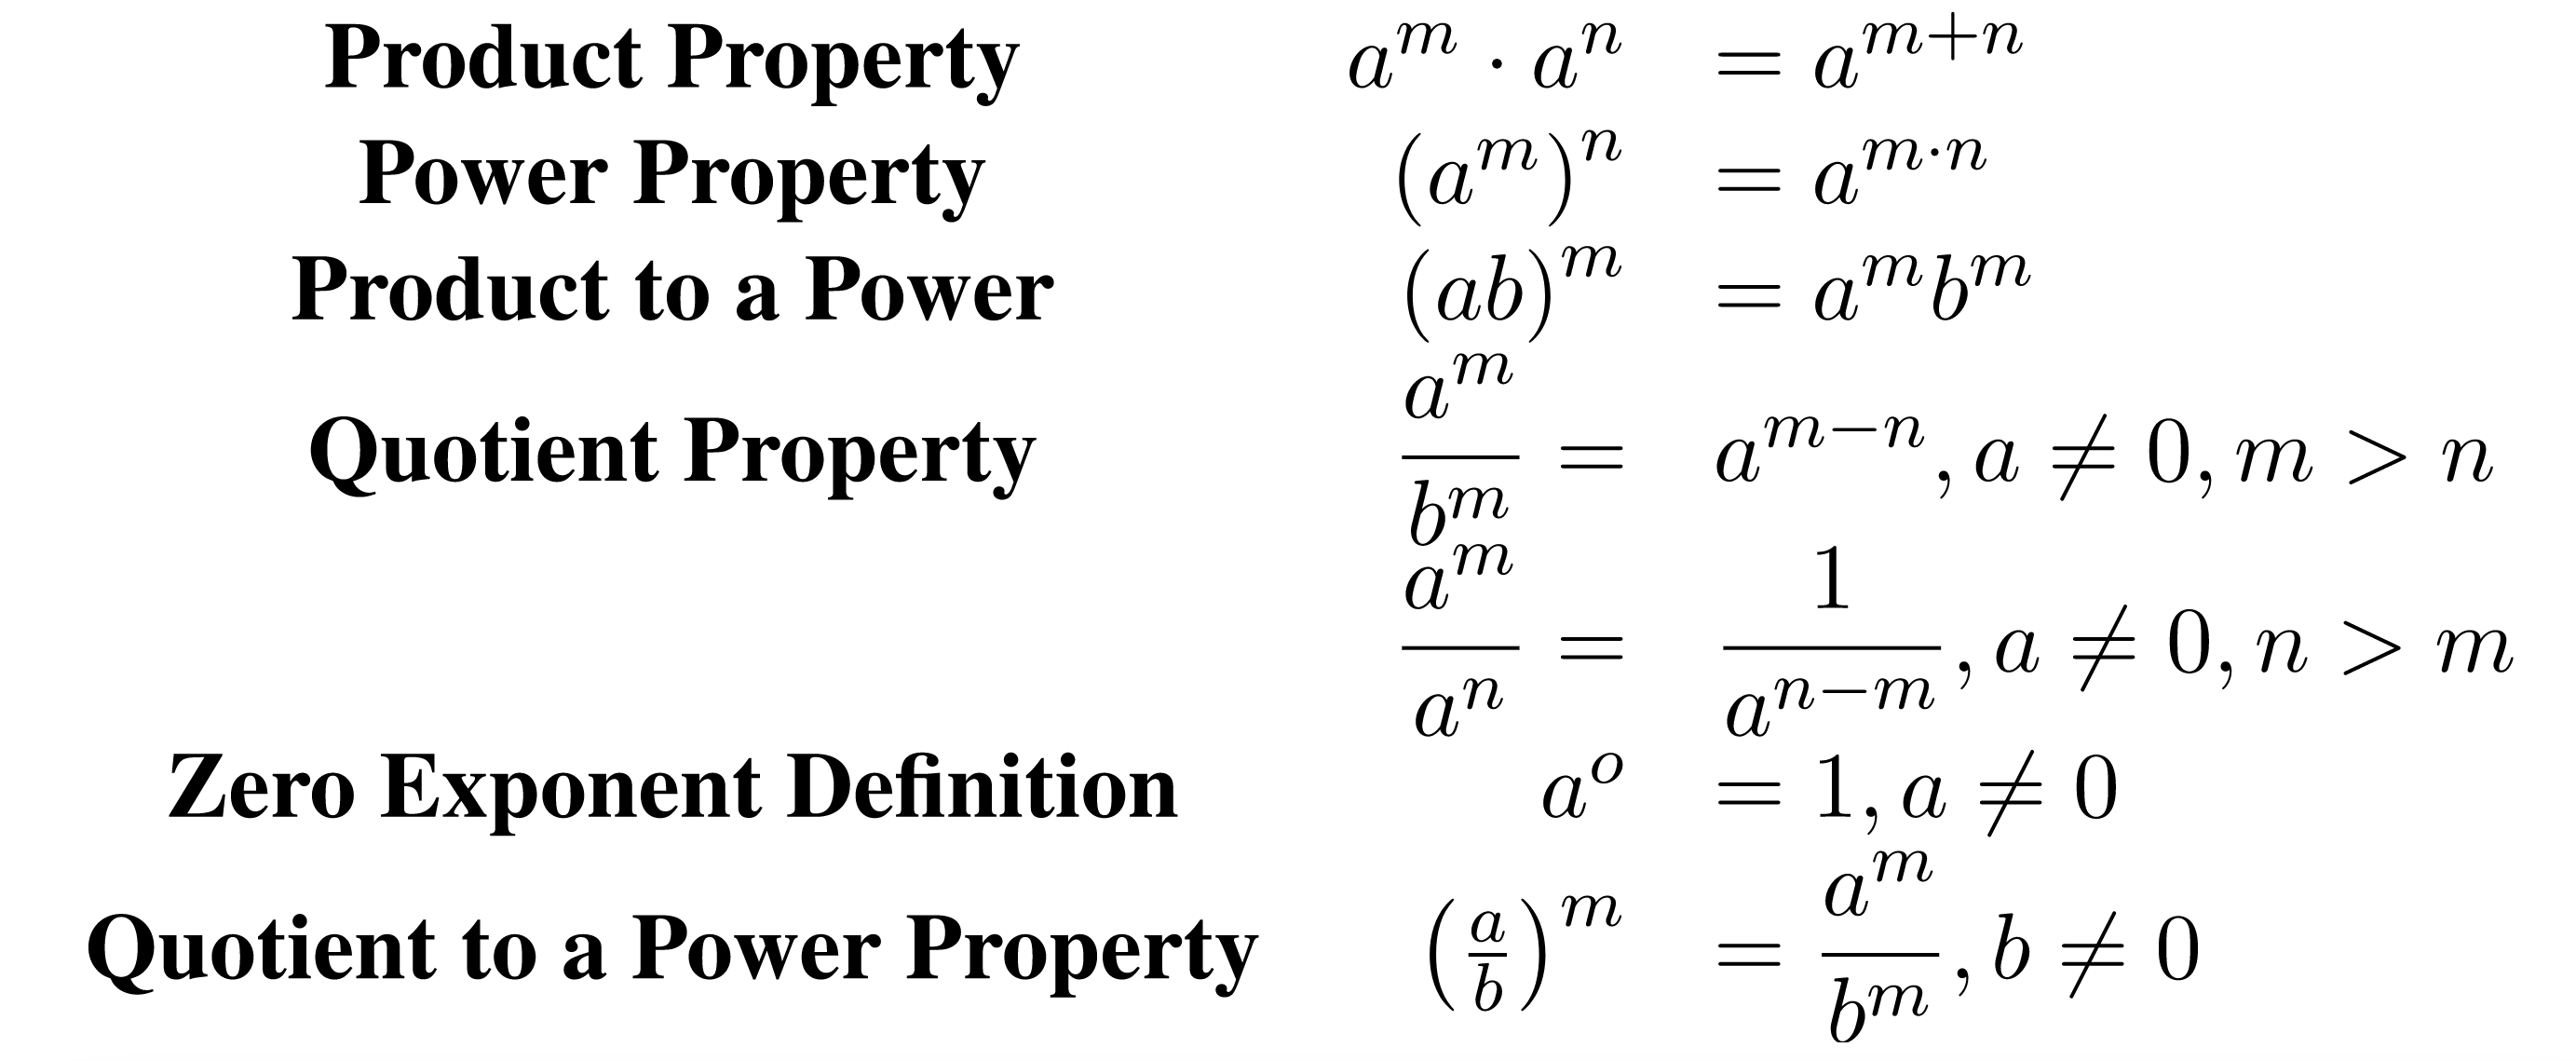 Summary of Product, Power, Product to a Power, Quotient, Zero Exponent Definition, and Quotient to a Power Properties.